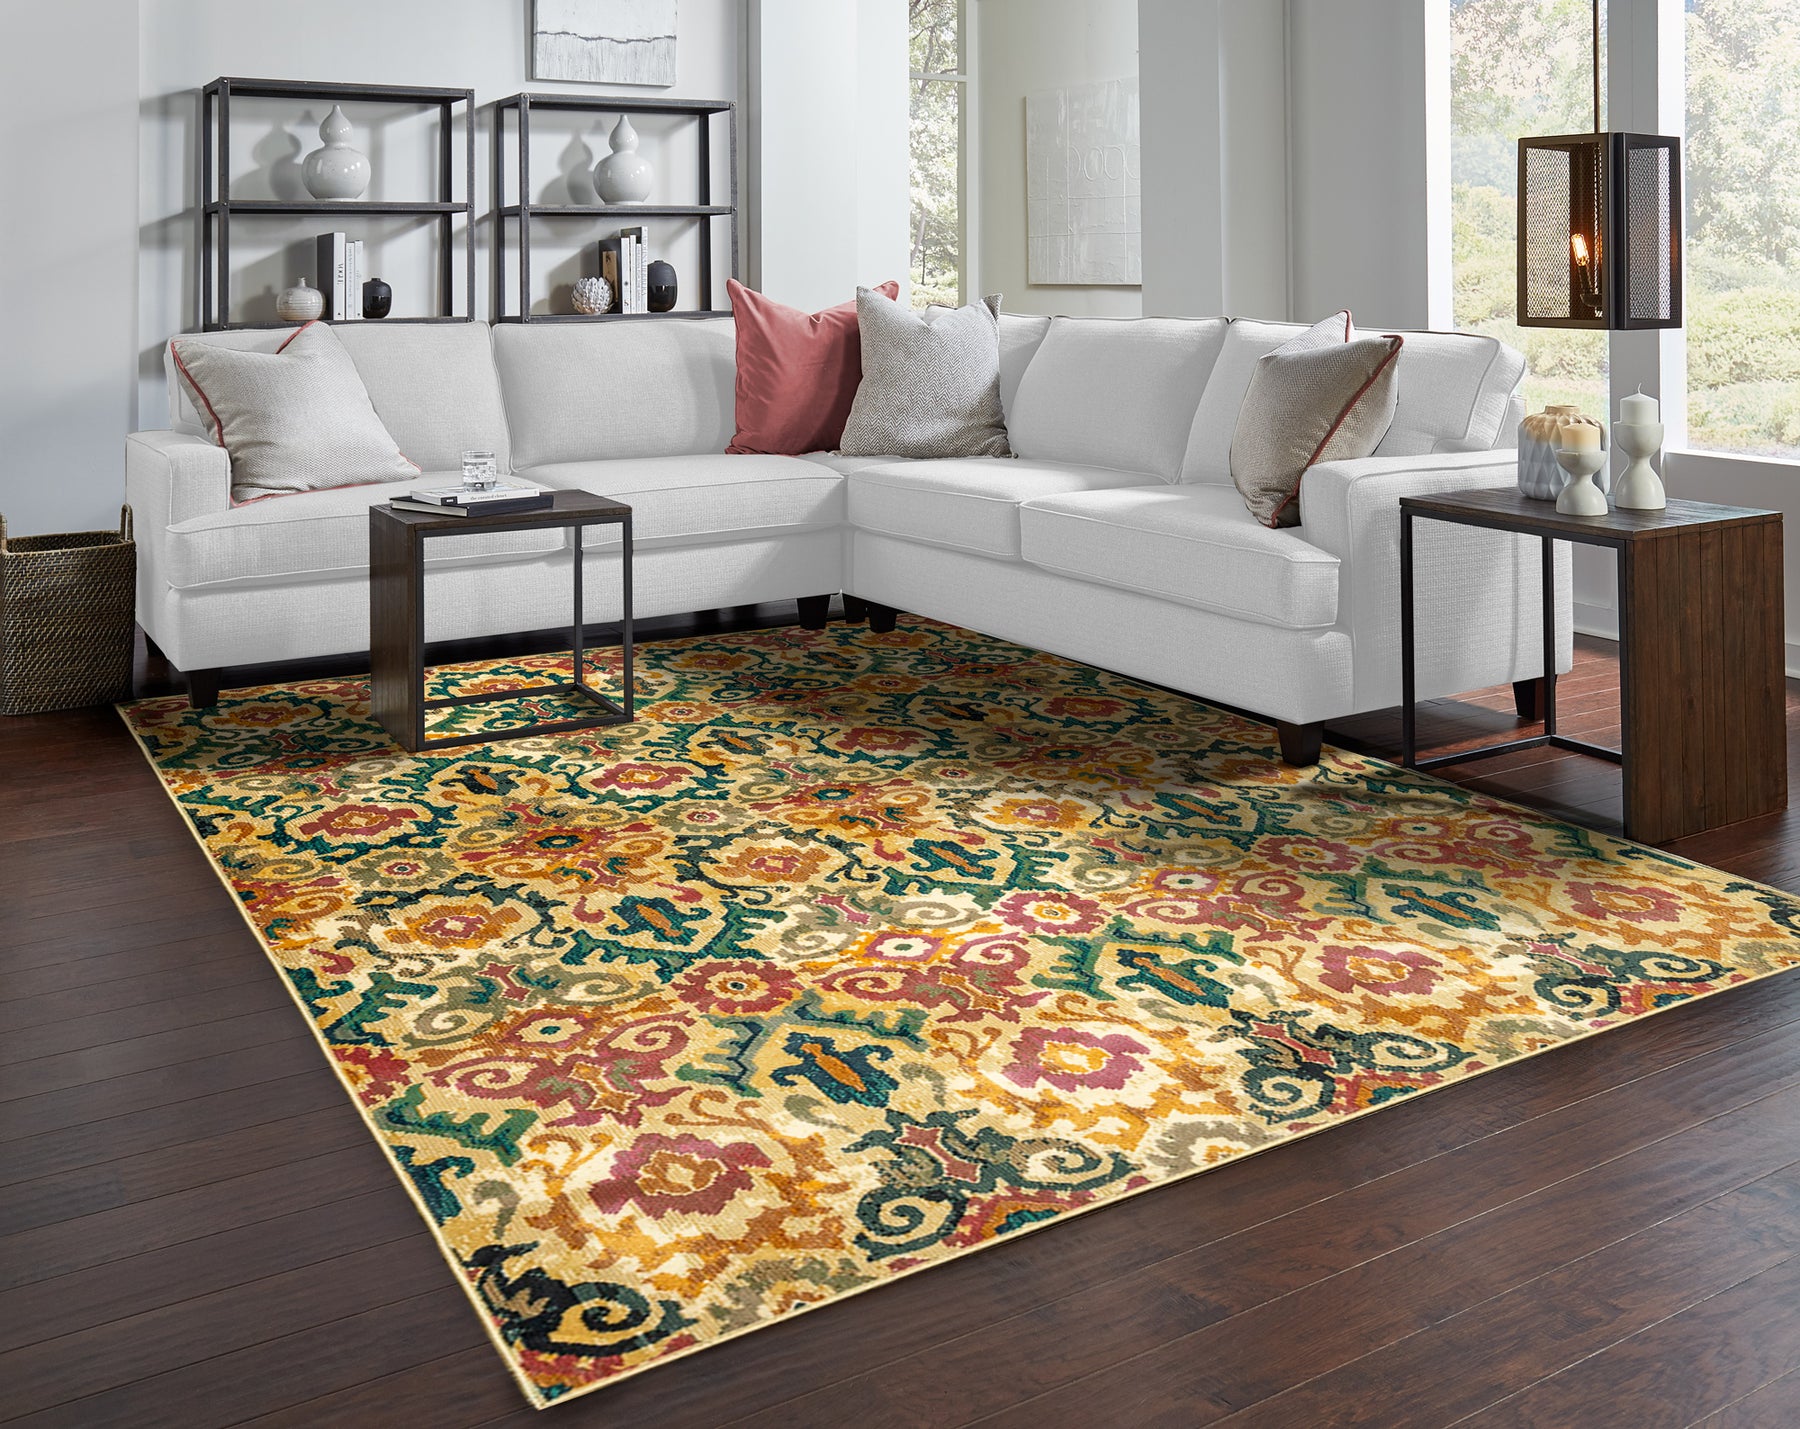 How to Pick the Right Rug for Your Space